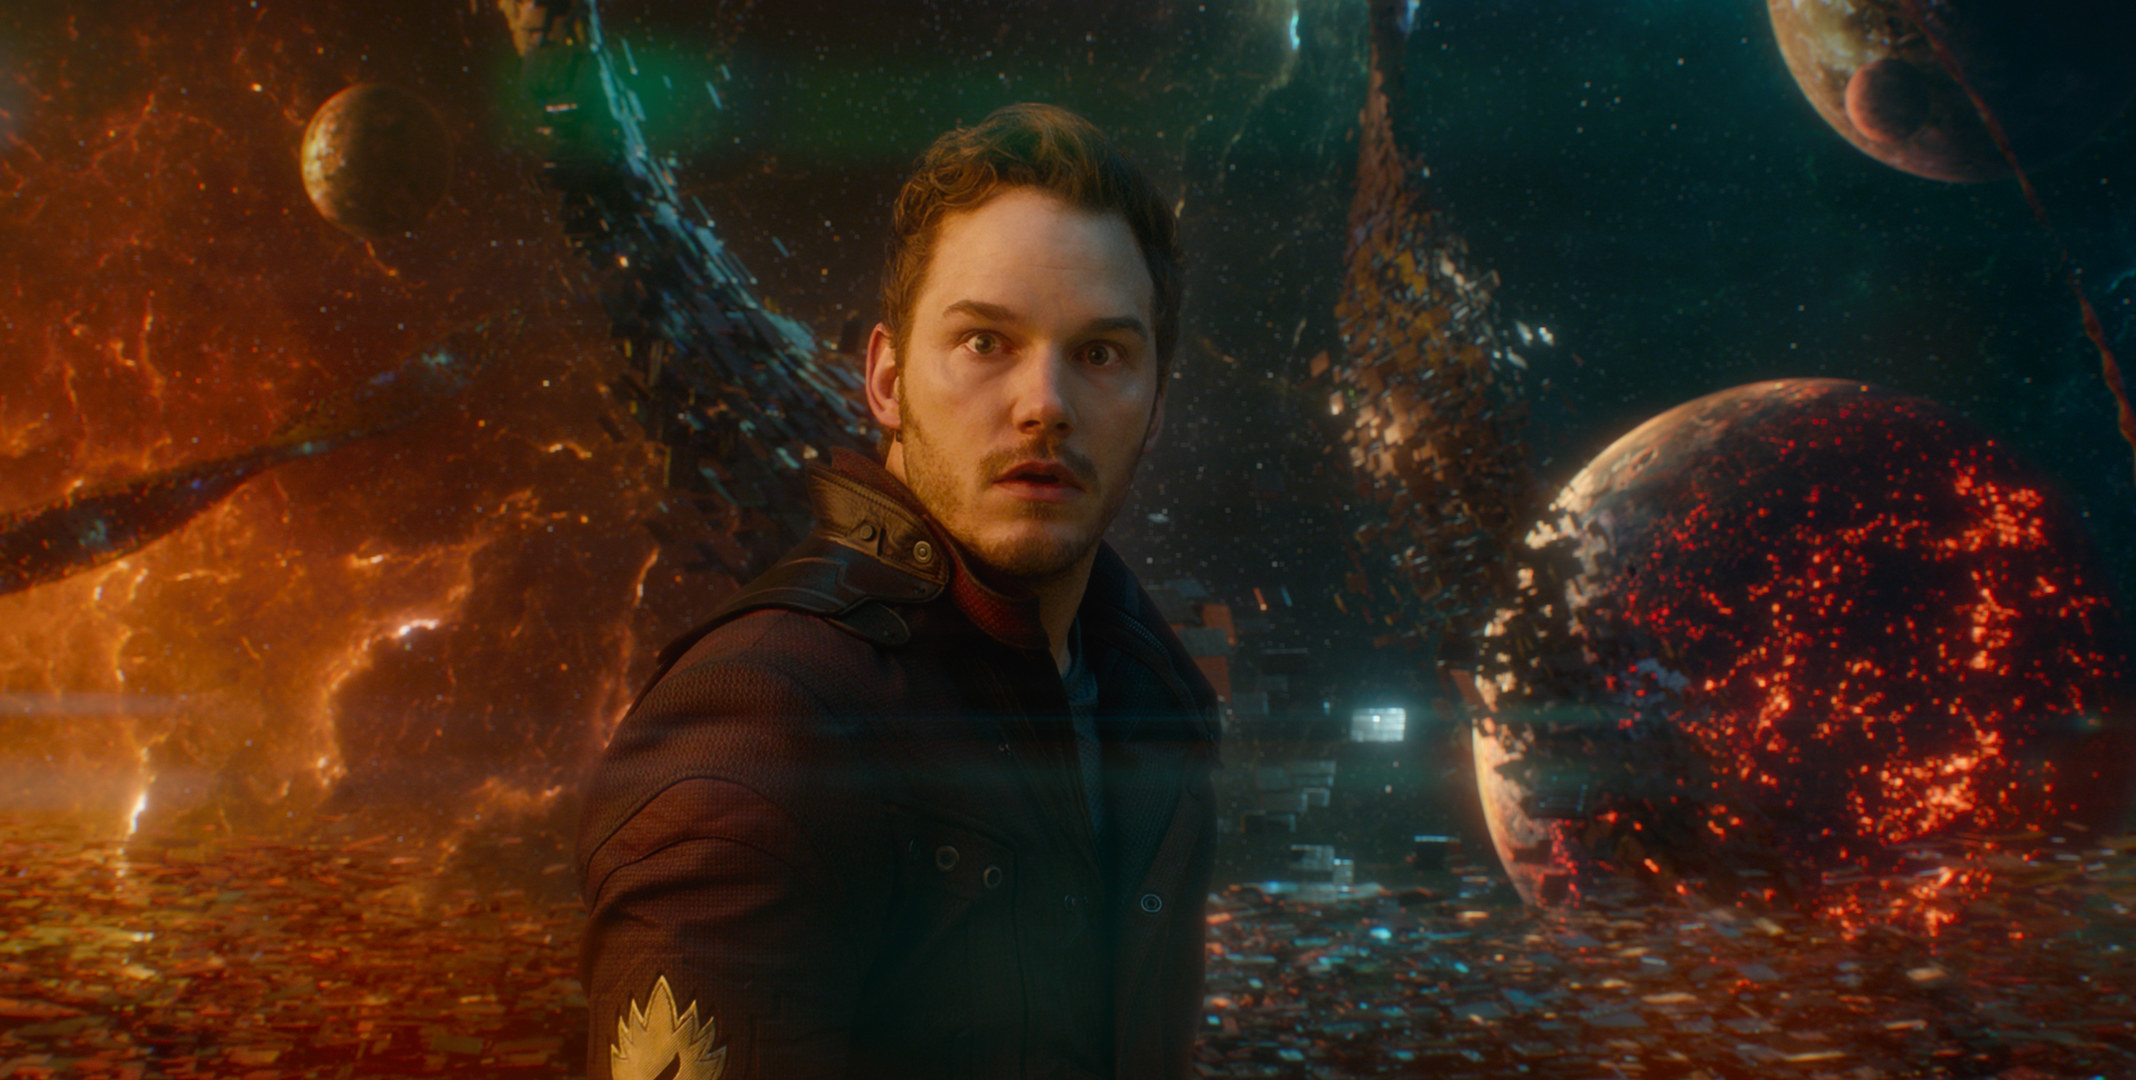 Star-Lord looks shocked